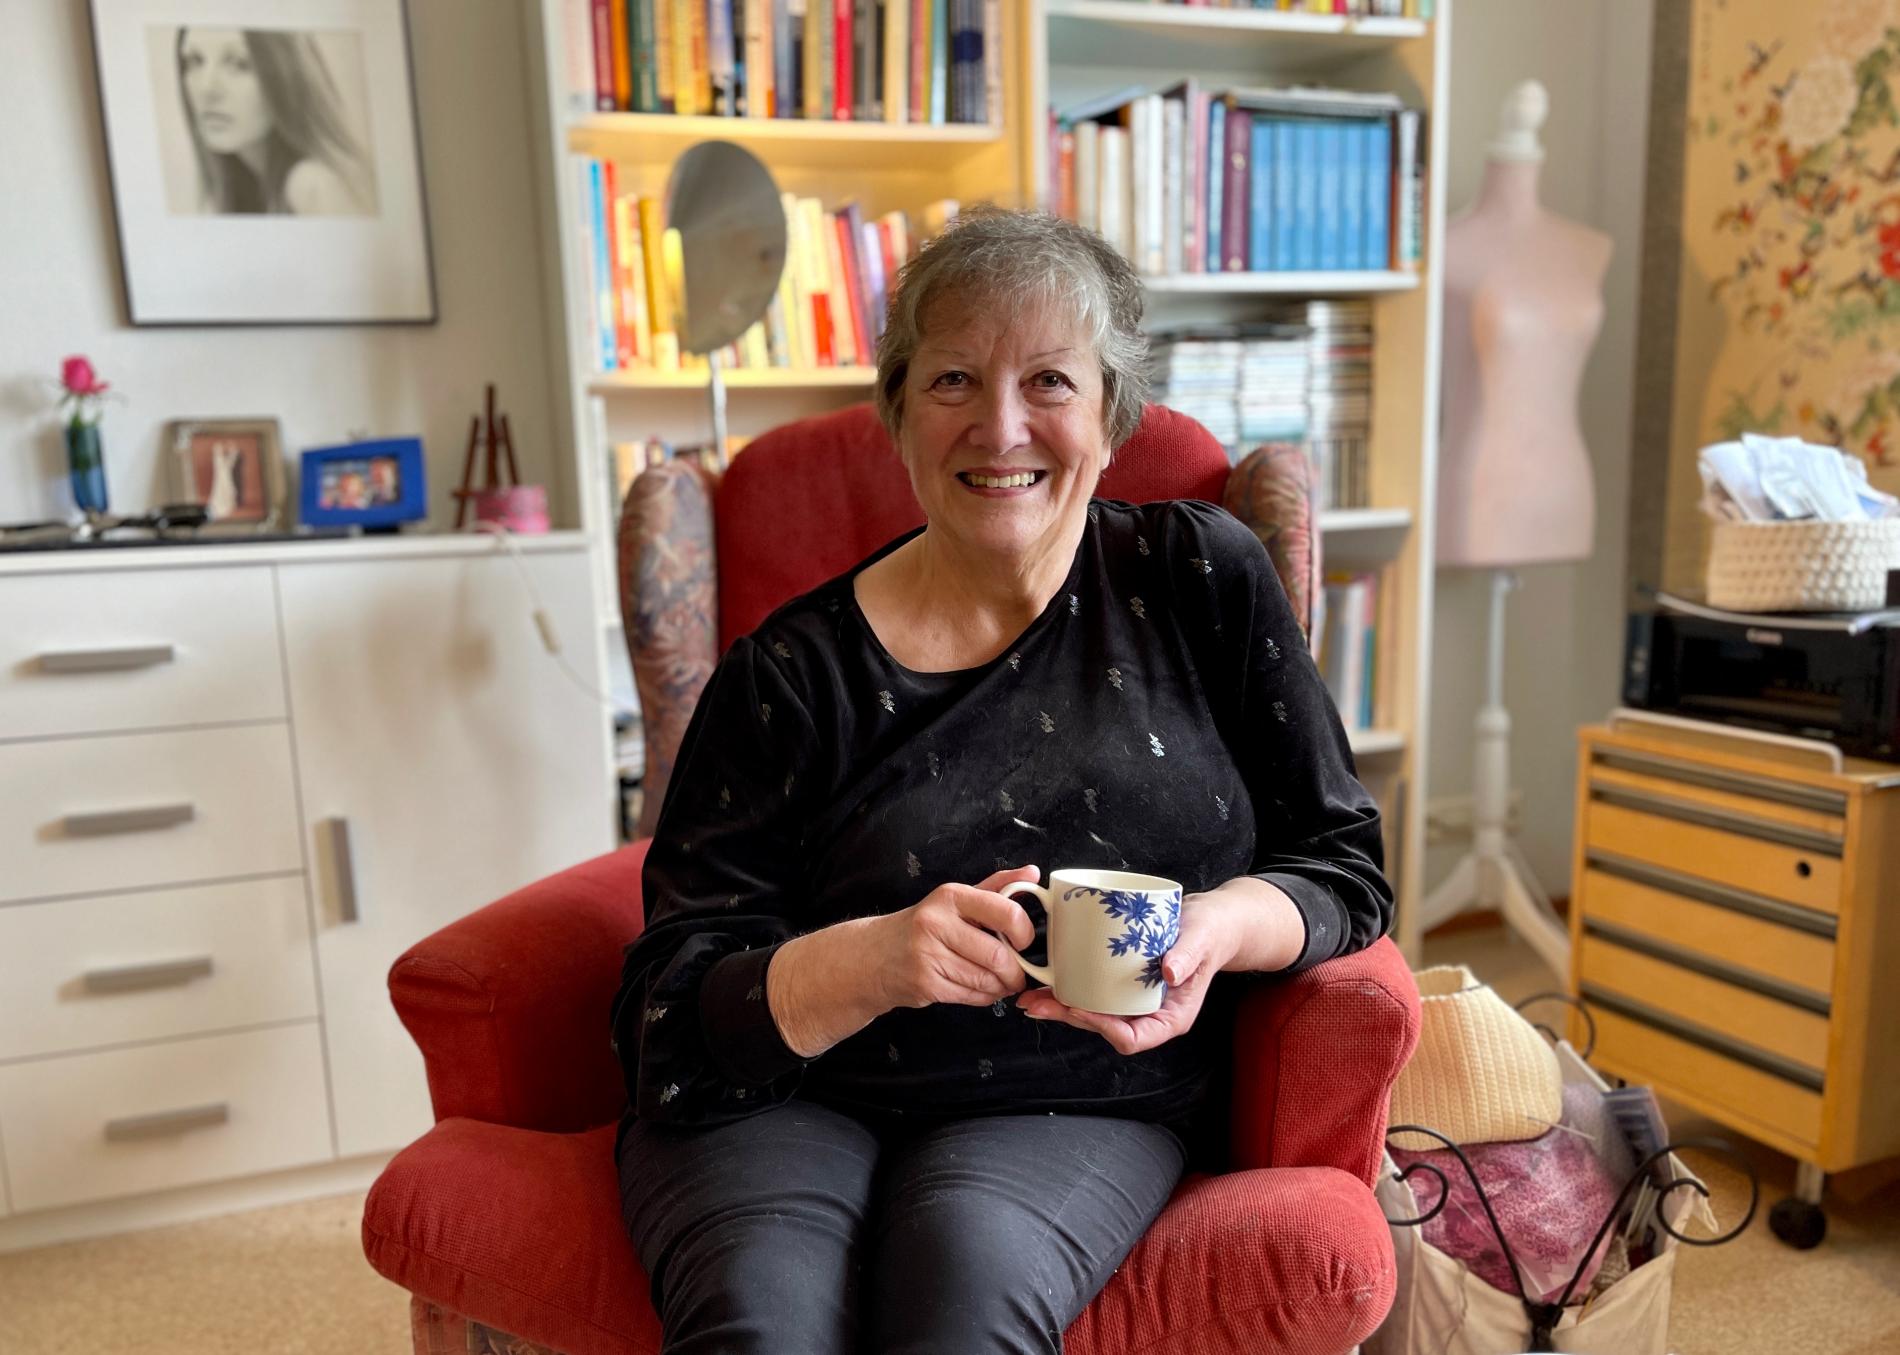 A smiling woman sitting home with a cup of coffee in her hand.